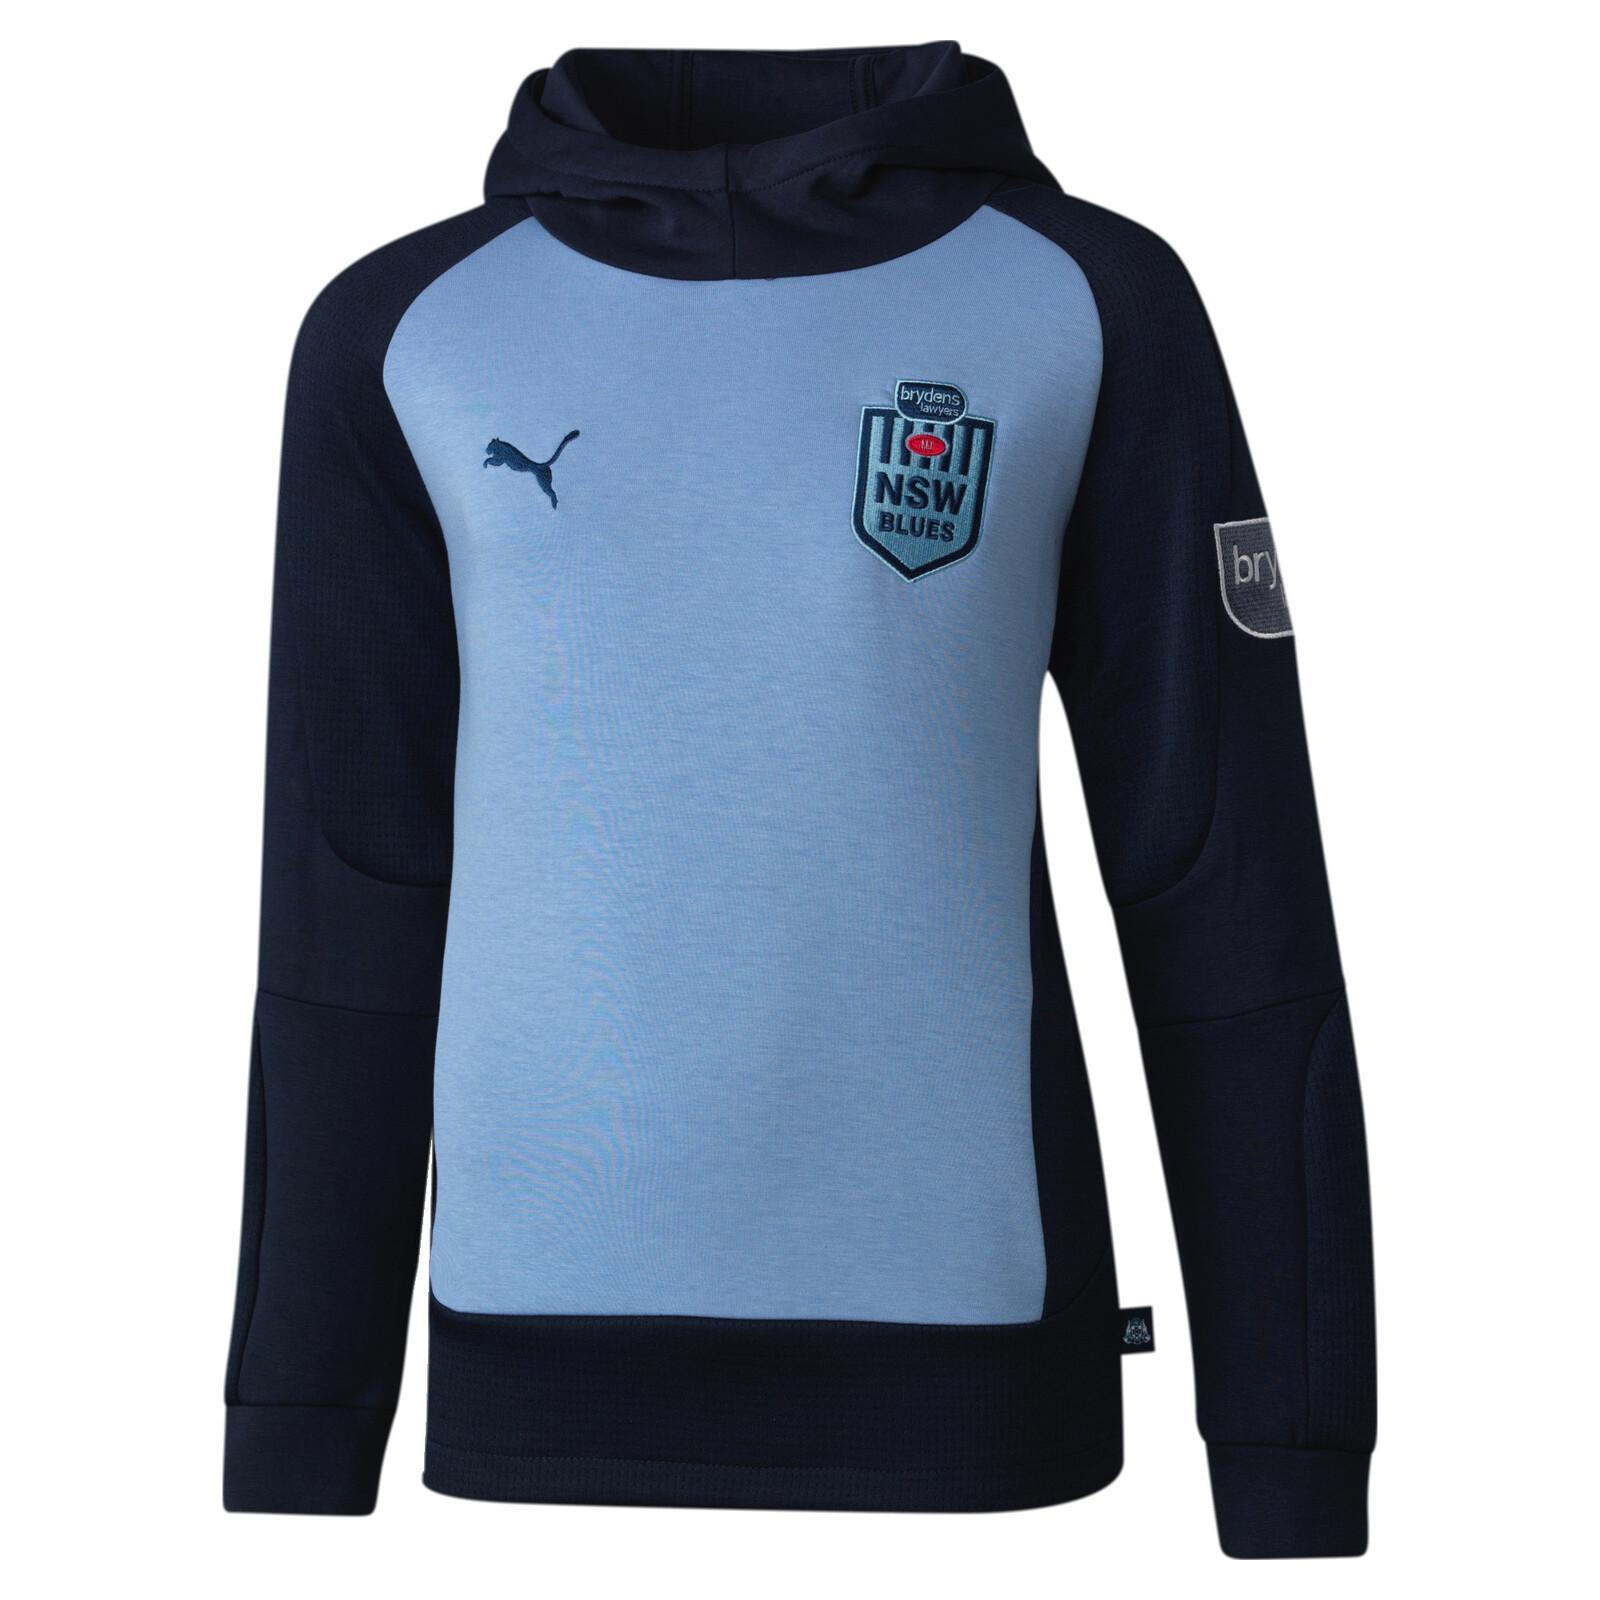 NSW Blues 2022 Puma State Of Origin Youth Team Hoody Hoodie Sizes XS-XL! [Size: Youth XSmall]